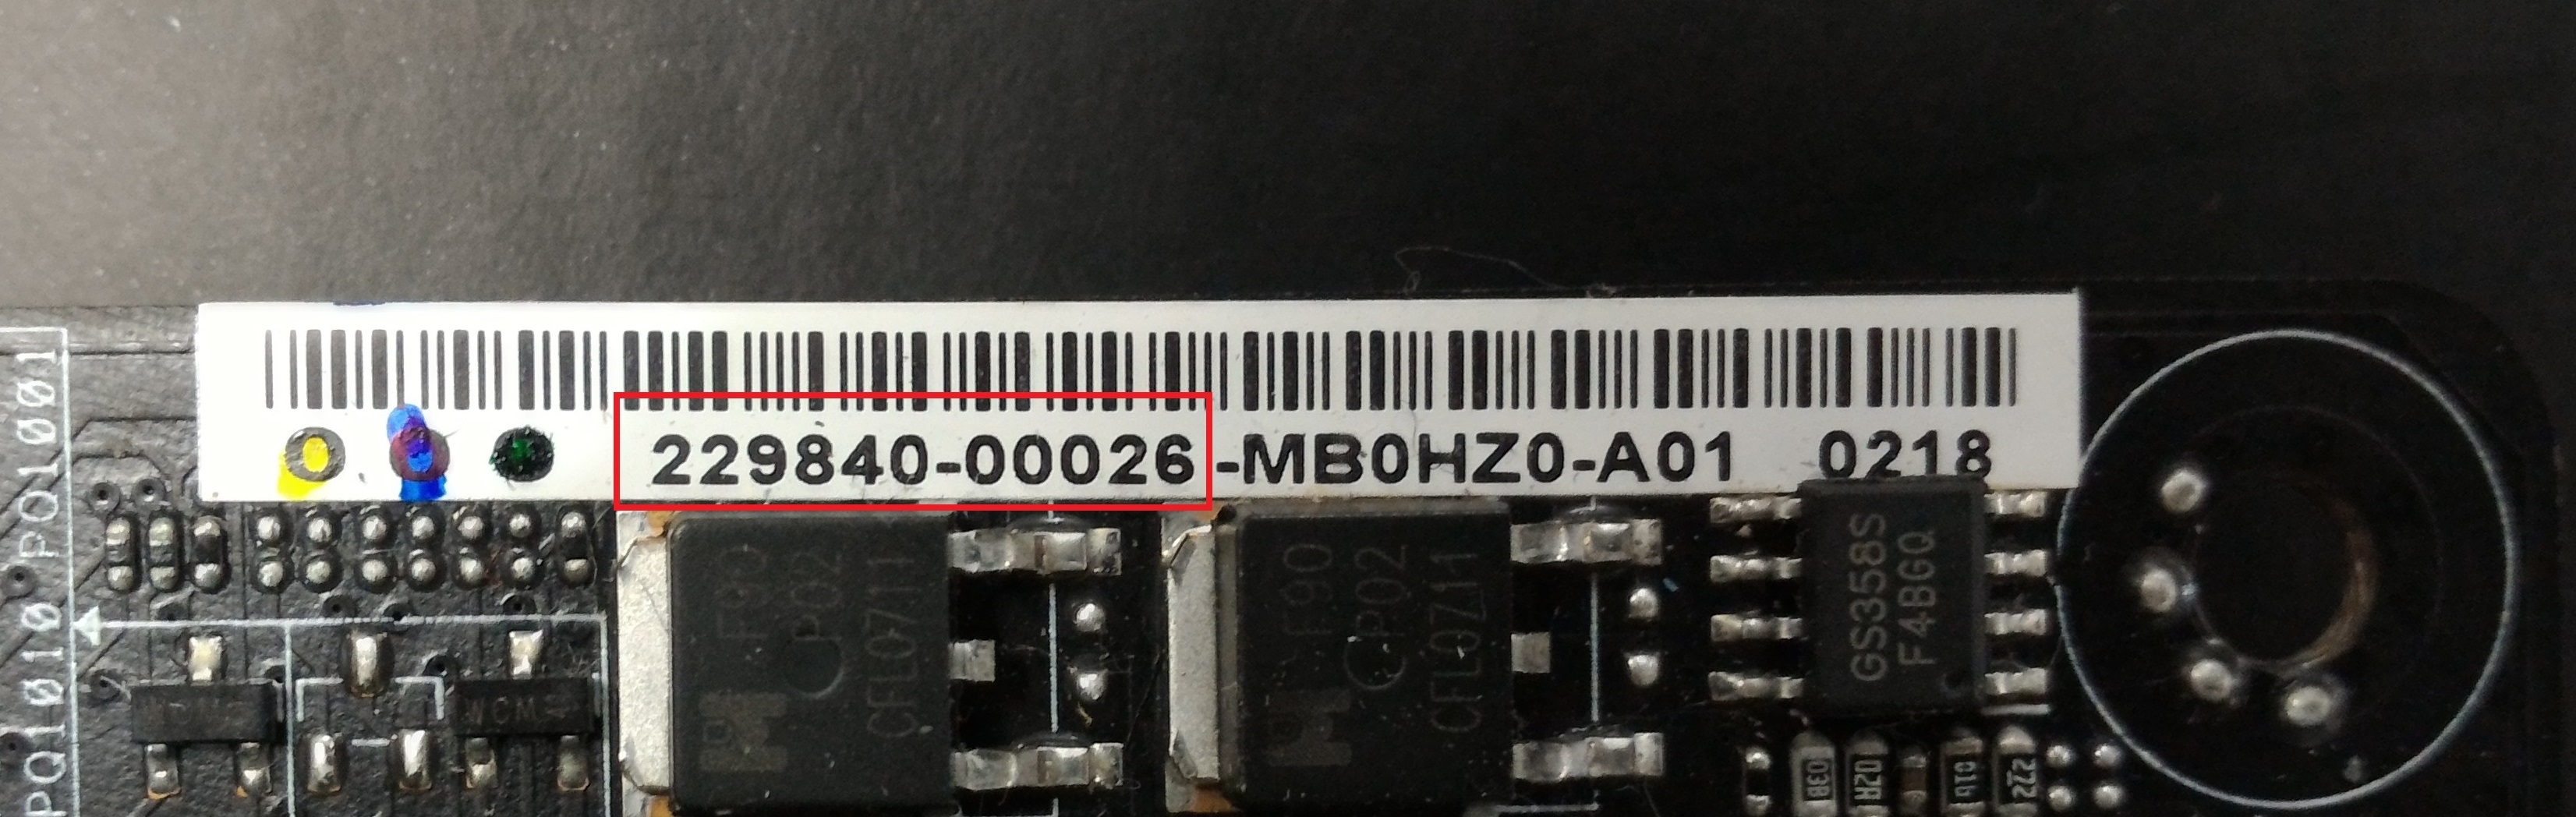 How to find serial number and PPID?